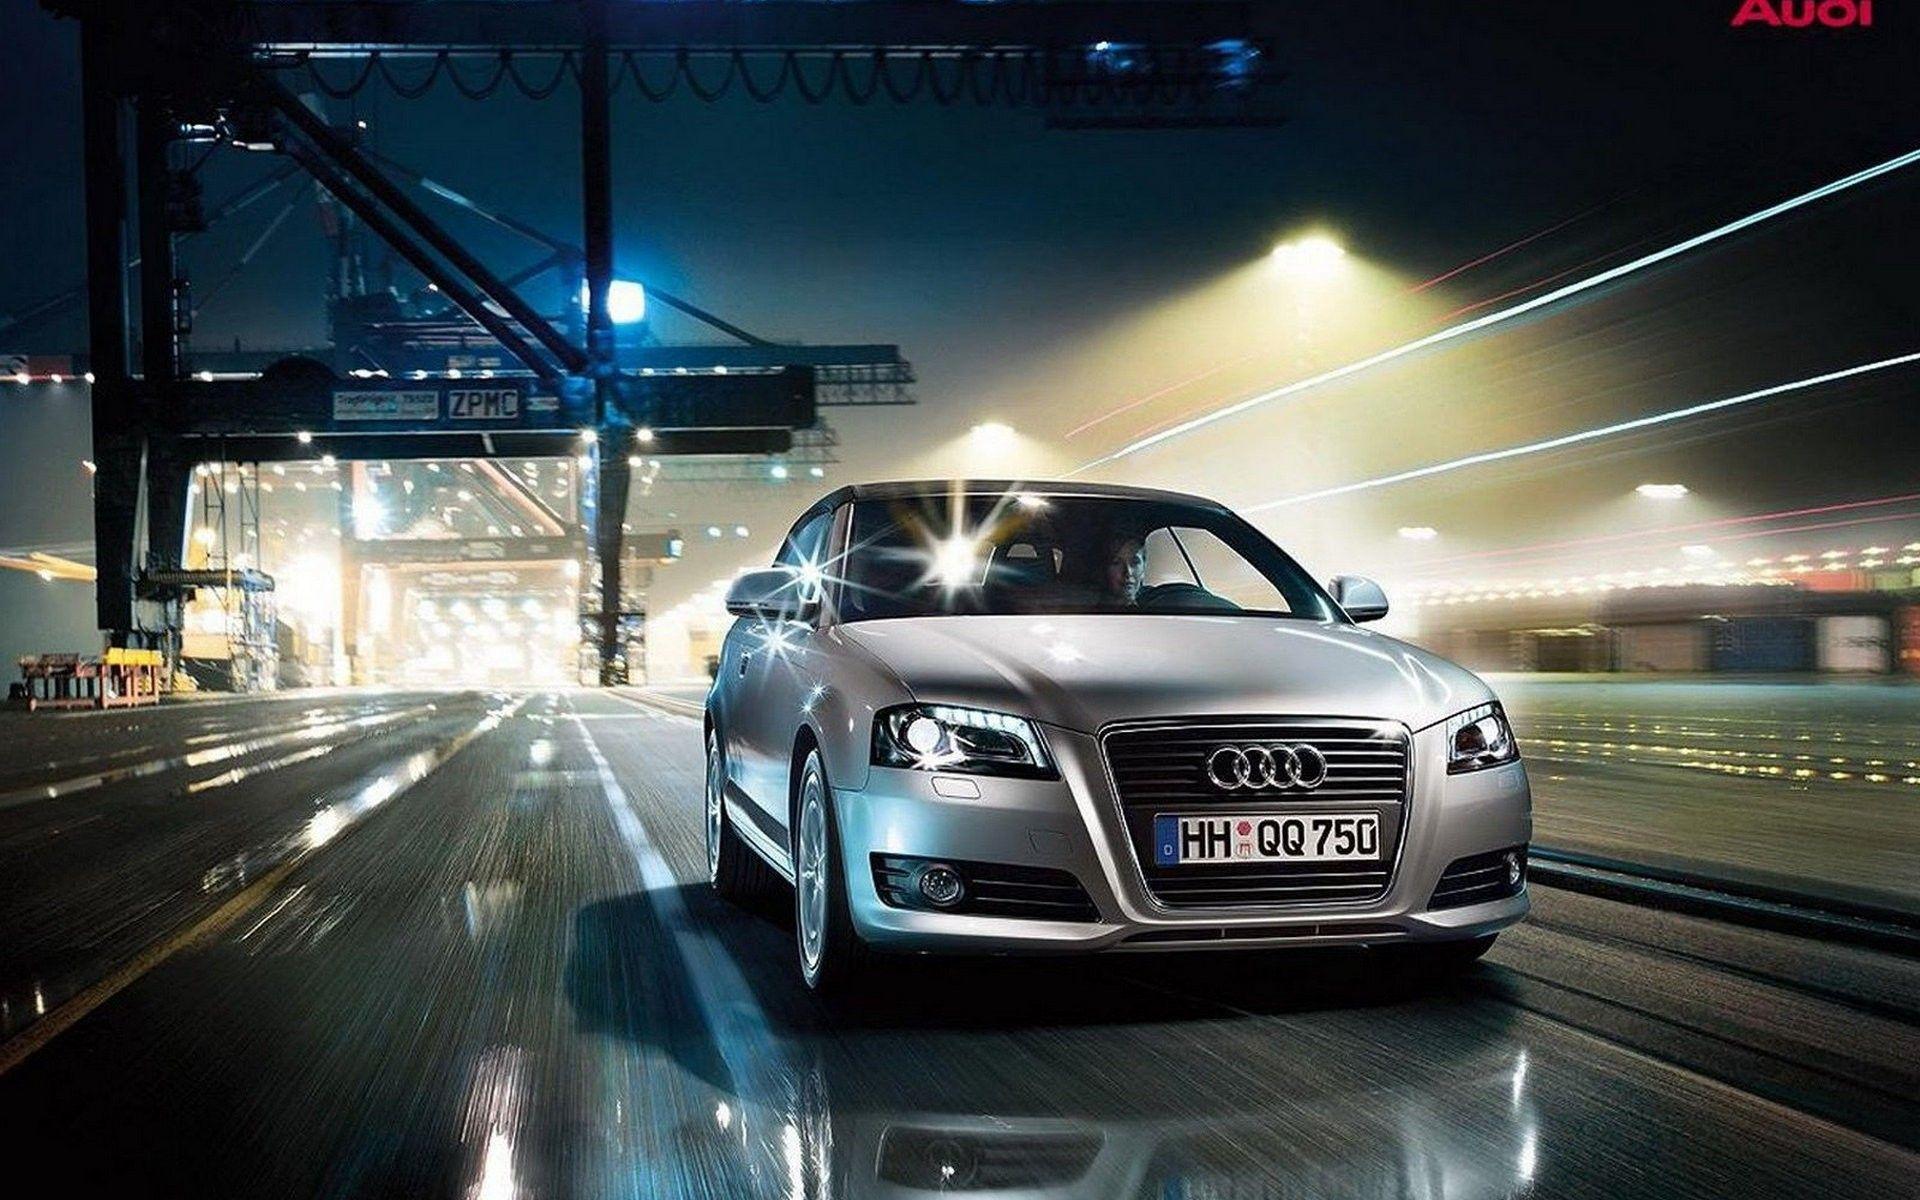 Cool HD Audi Wallpaper For Free Download